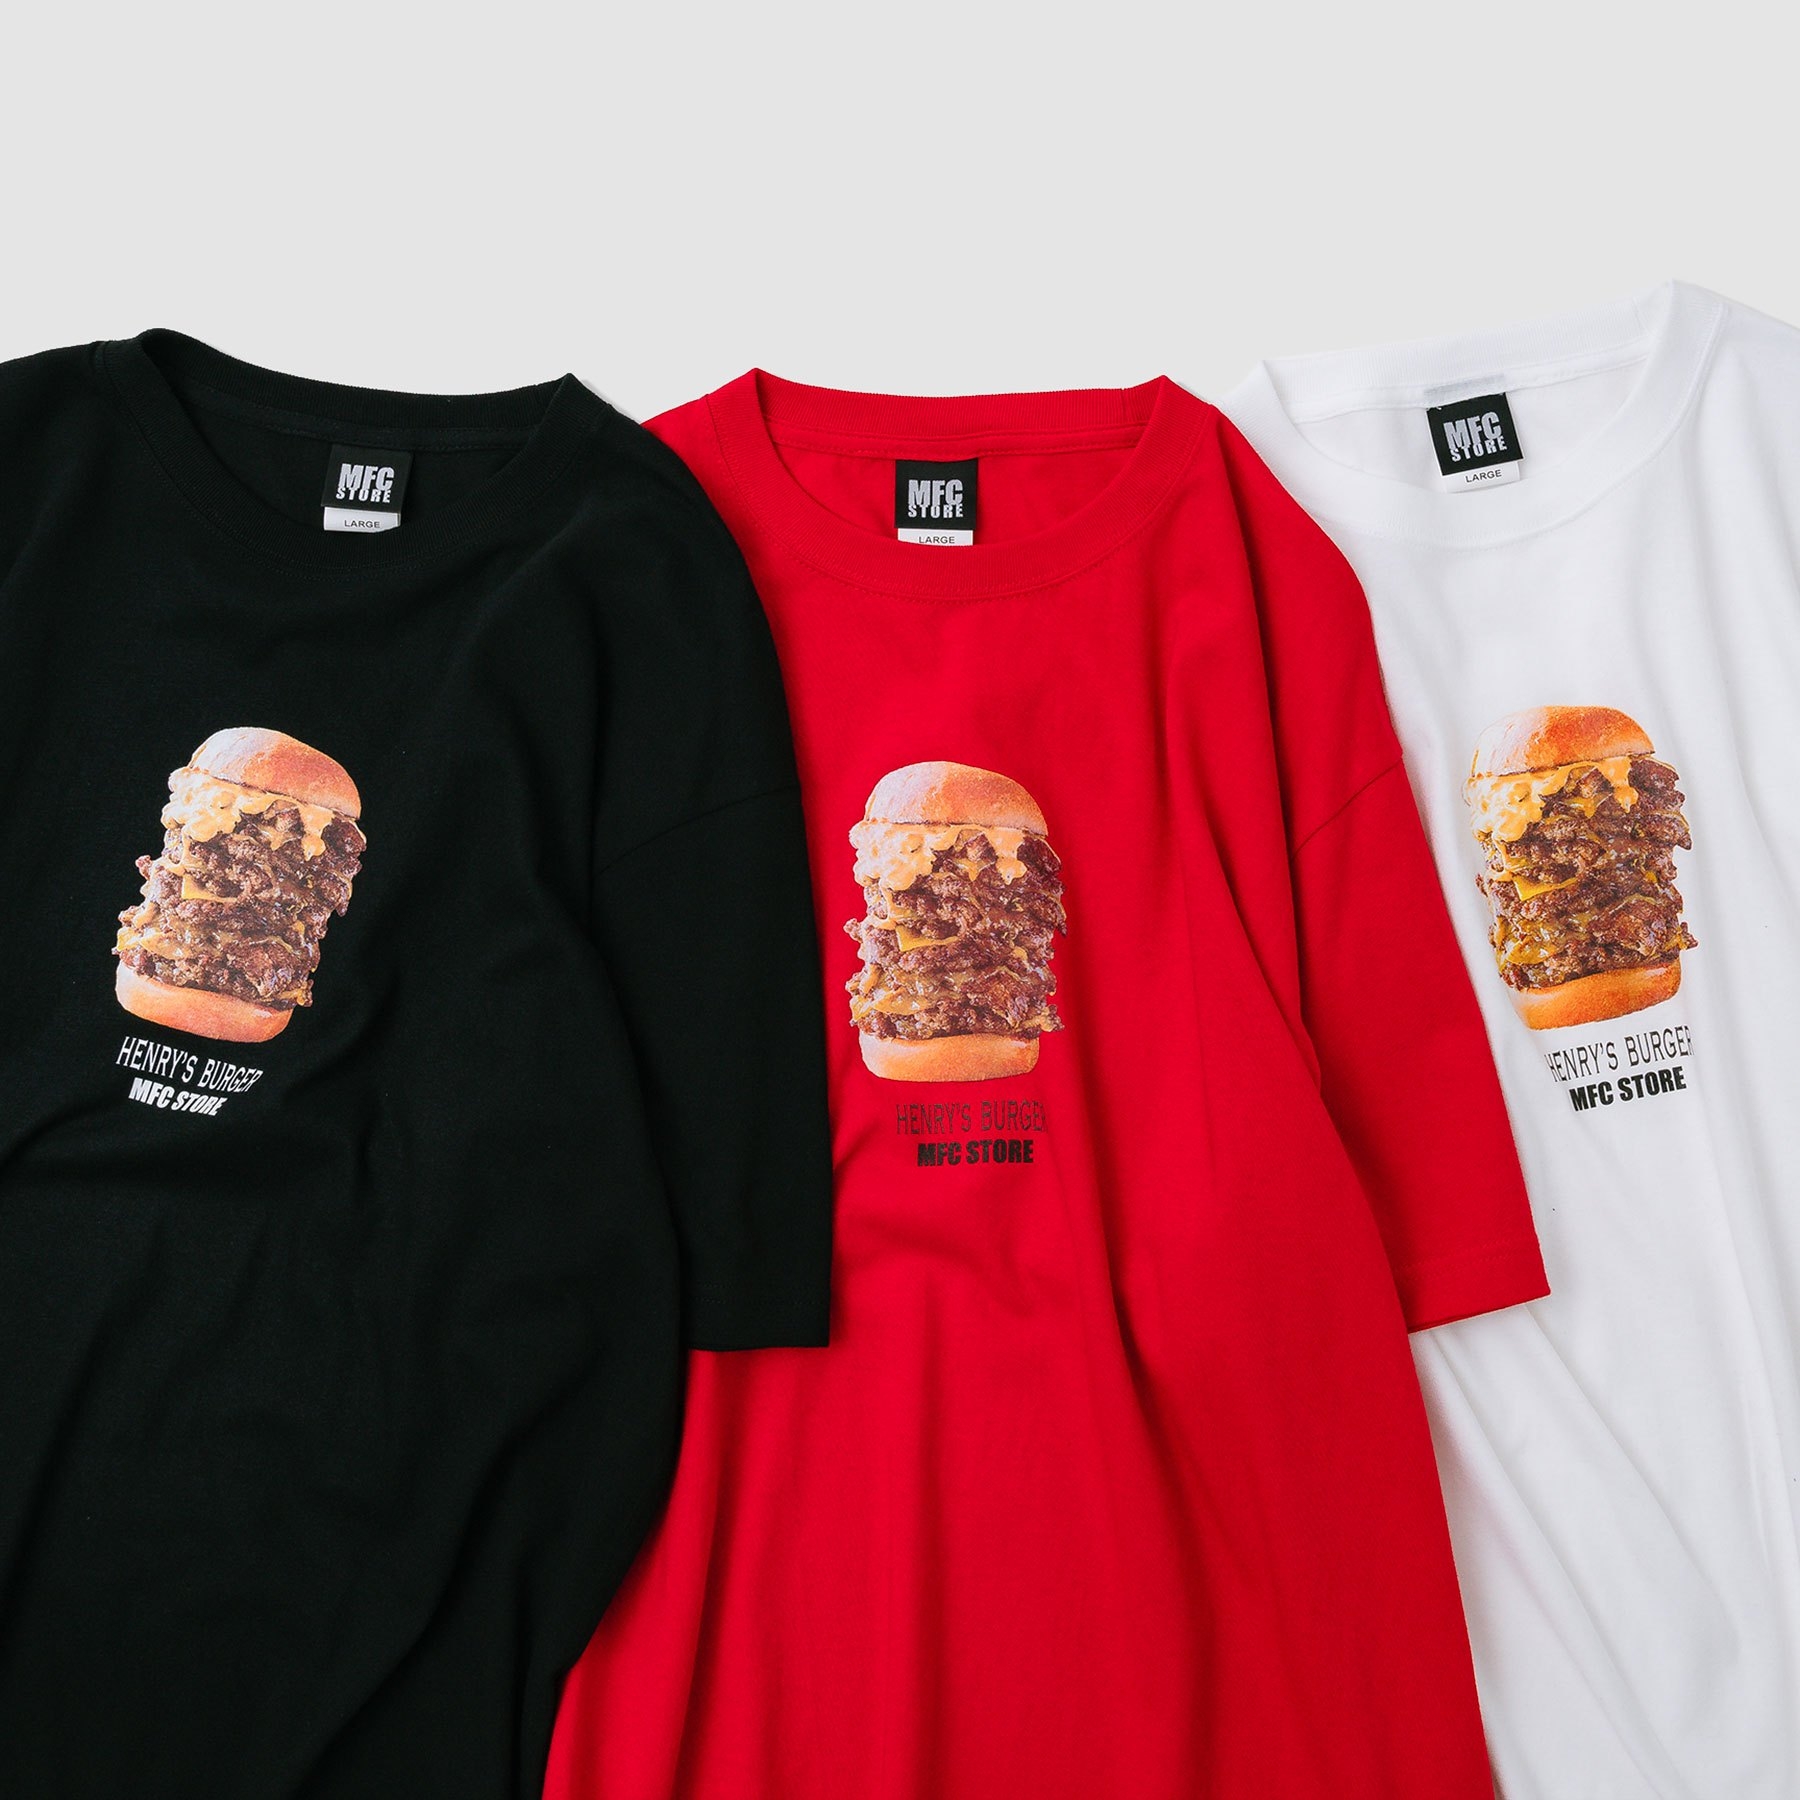 HENRYʼS BURGER x MFC STORE